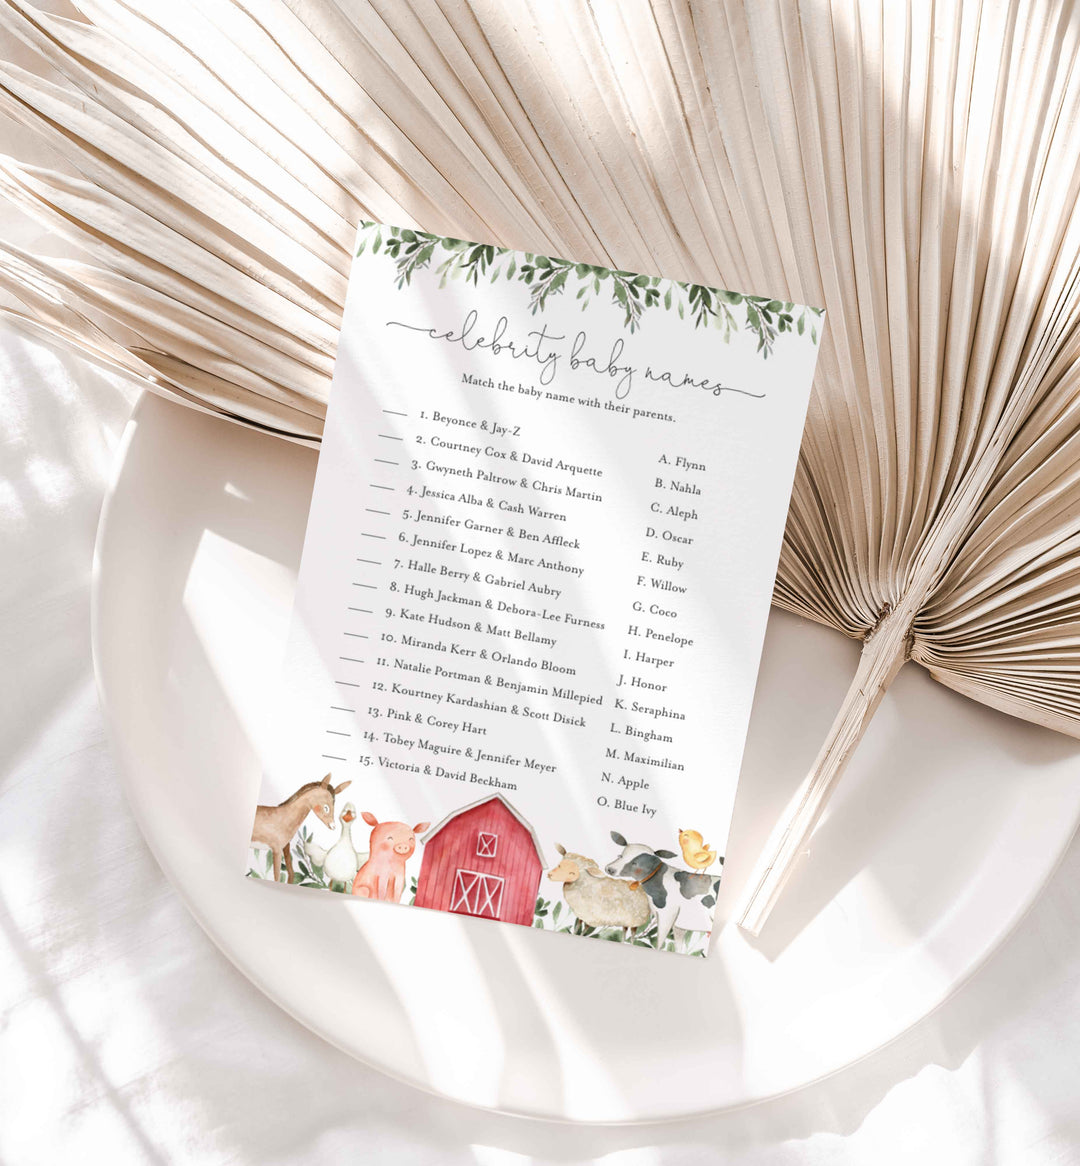 On The Farm Baby Shower Celebrity Baby Names Game Printable